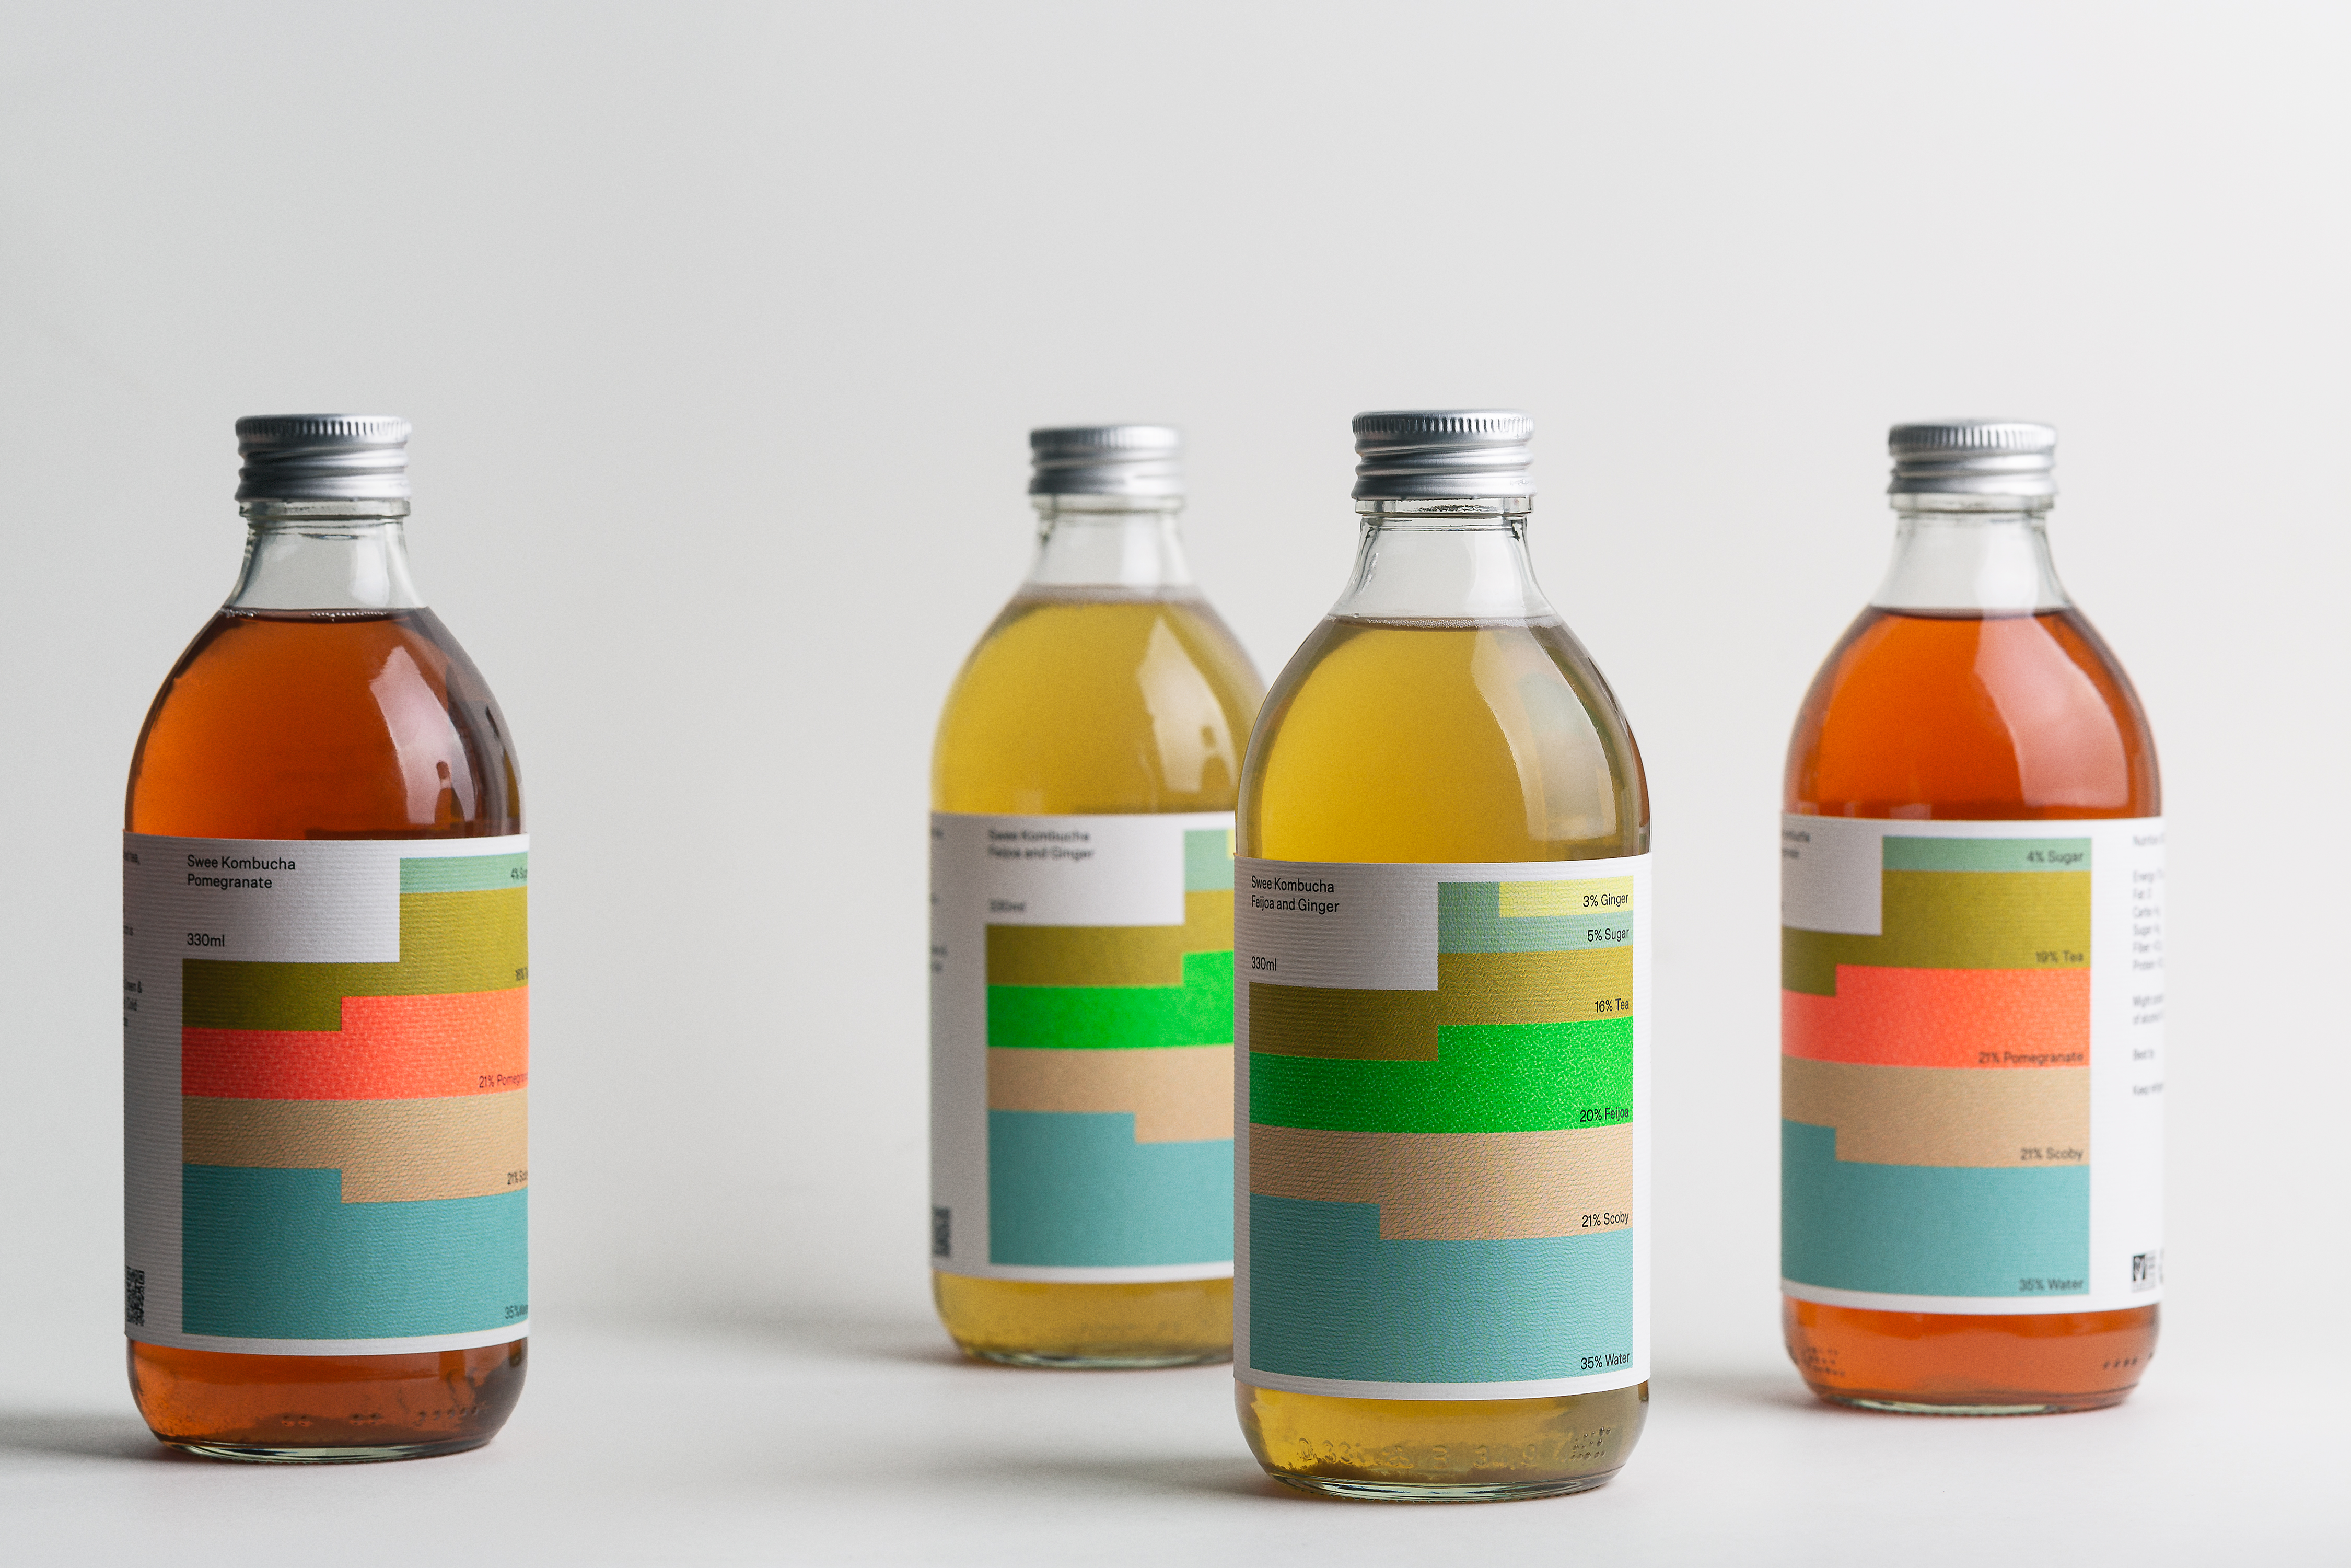 Branding and packaging for kombucha brand Swee designed by Bedow